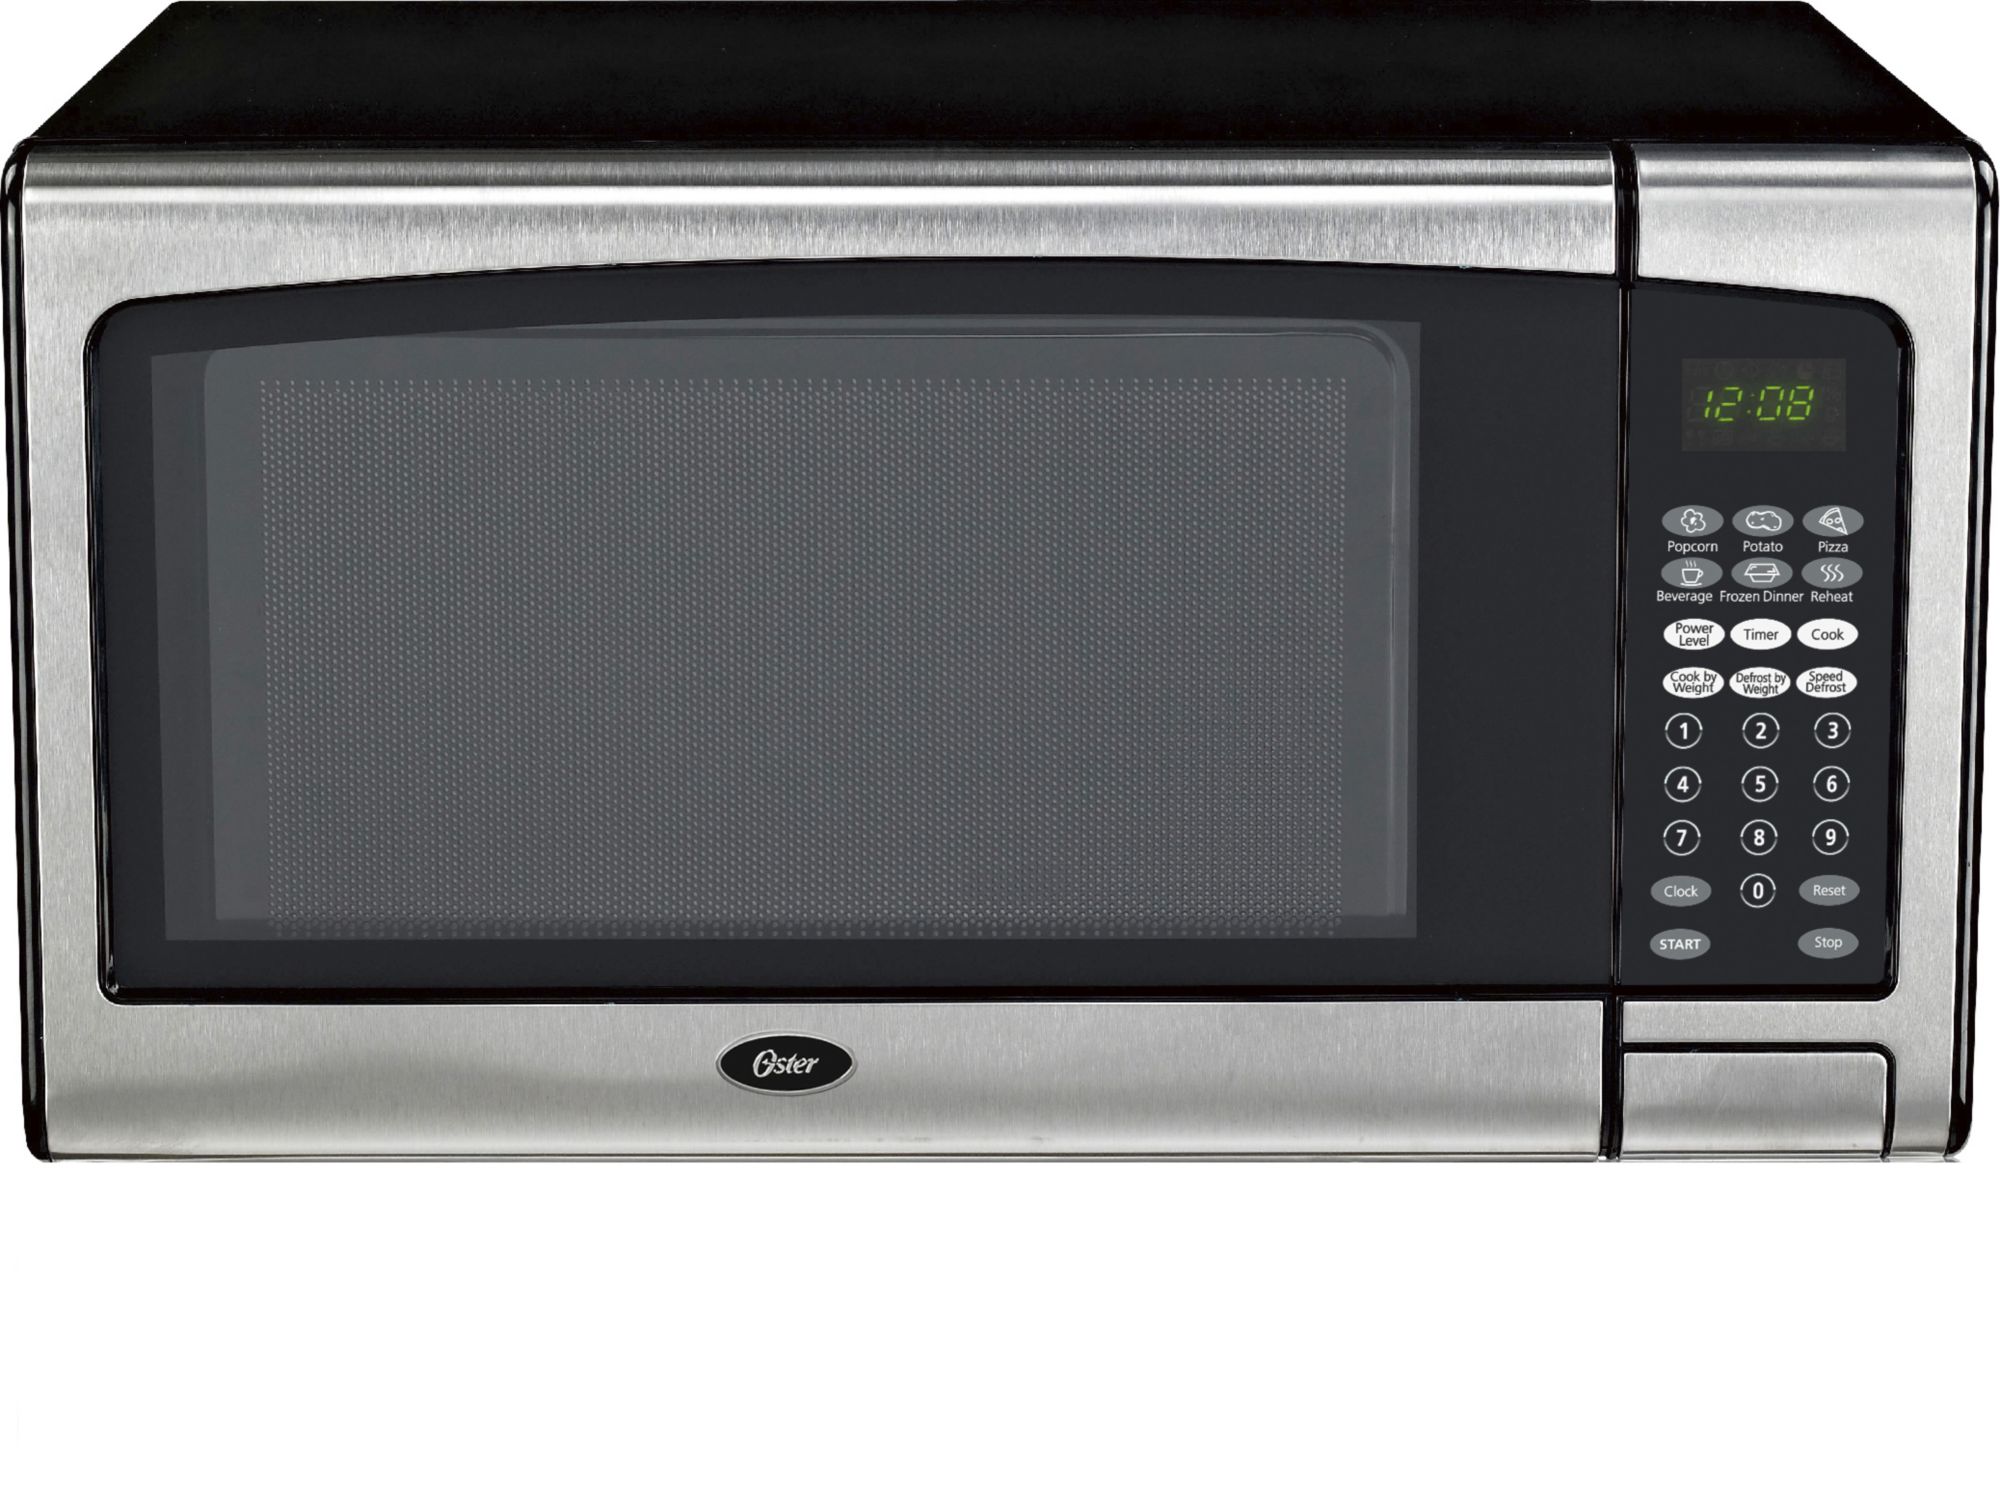 Oster 1 3 Cu Ft Countertop Microwave Stainless Steel Trim